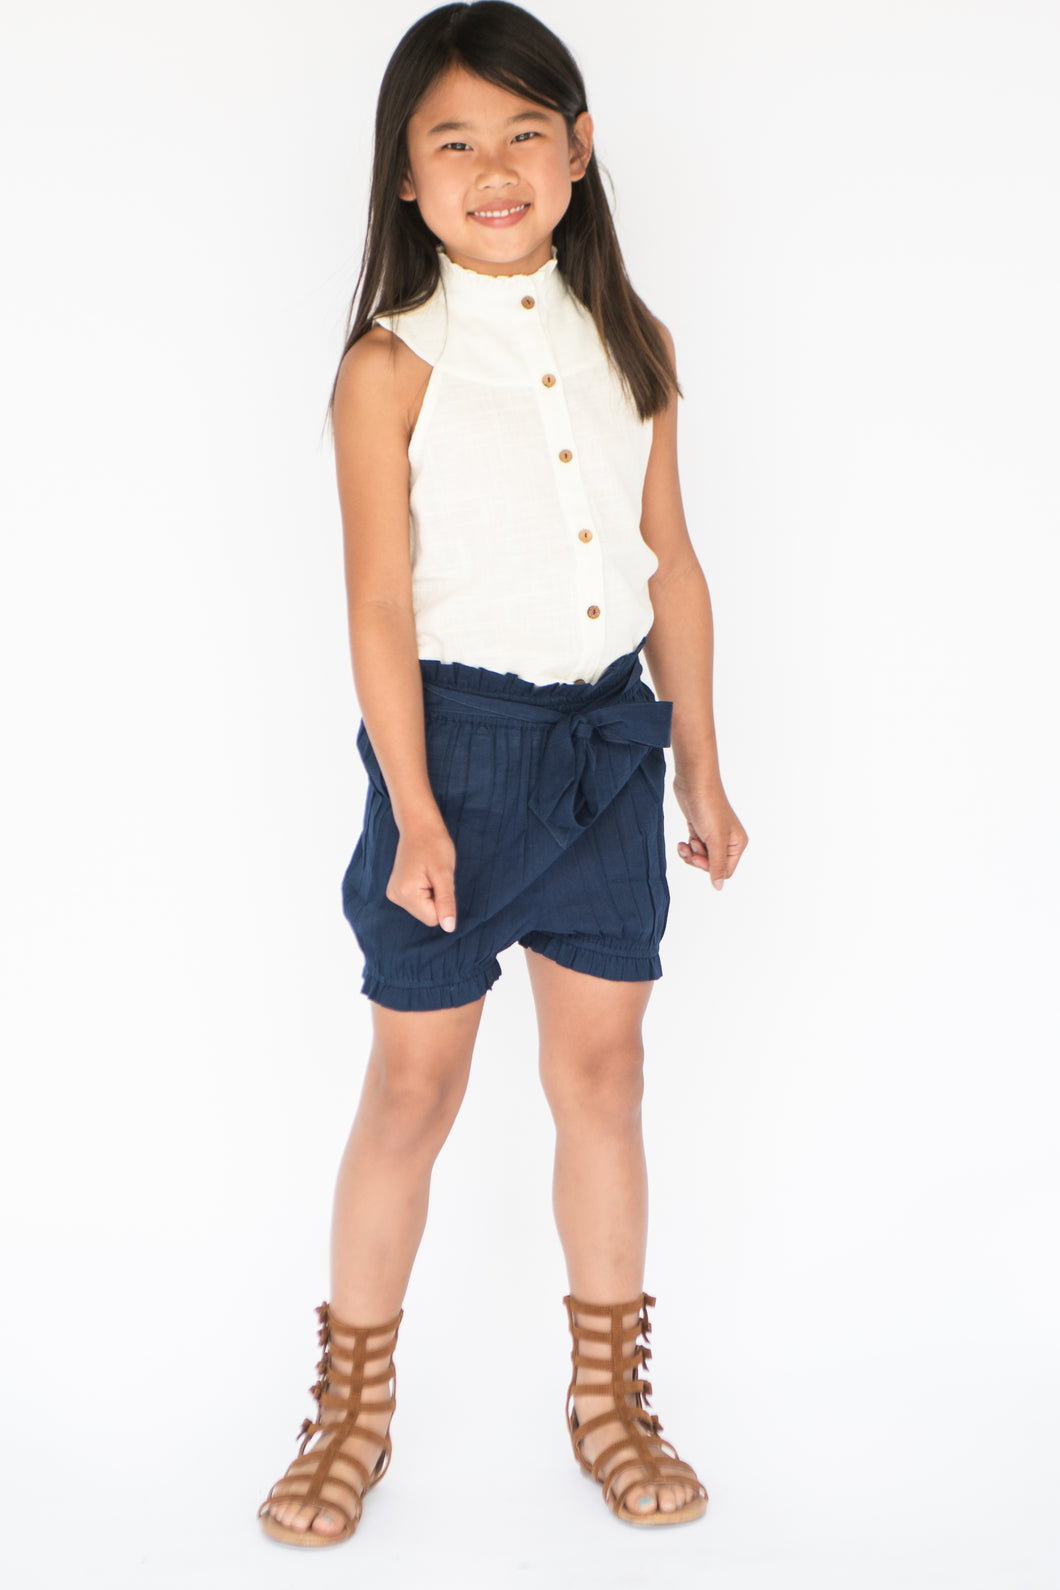 Navy-Blue High Waist Paper Bag style Shorts and Frill Blouse - Kids Wholesale Boutique Clothing, Dress - Girls Dresses, Yo Baby Wholesale - Yo Baby